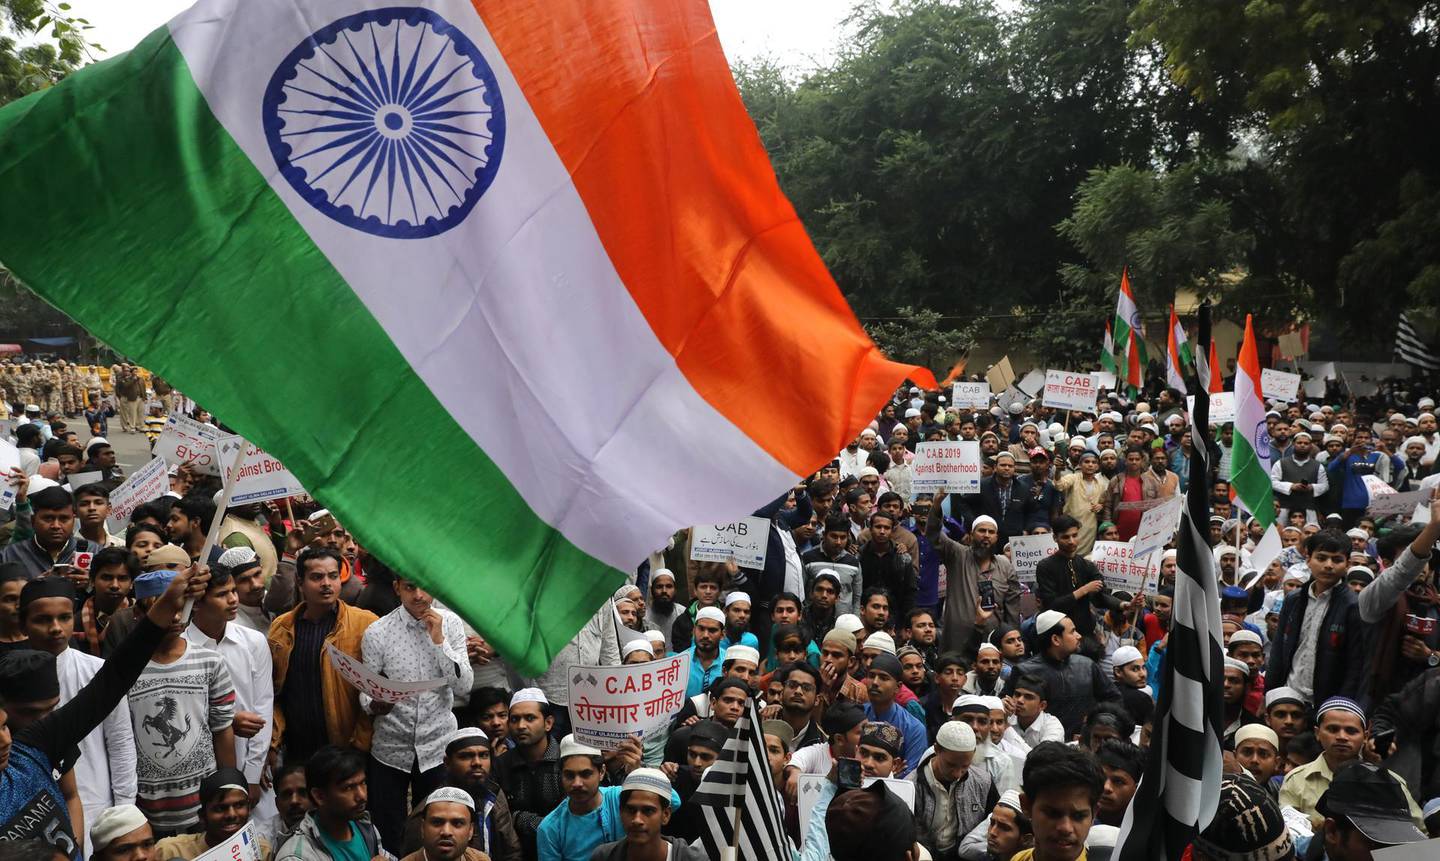 epa08069051 Indian Muslims from Jamiat Ulema-e-Hind take part in a protest against the Citizenship (Amendment) Bill 2019 (CAB) in New Delhi, India, 13 December 2019. The bill will give Indian citizenship rights to refugees from Hindu, Jain, Buddhist, Sikhs, Parsi or Christian communities coming from Afghanistan, Bangladesh and Pakistan.  EPA/RAJAT GUPTA